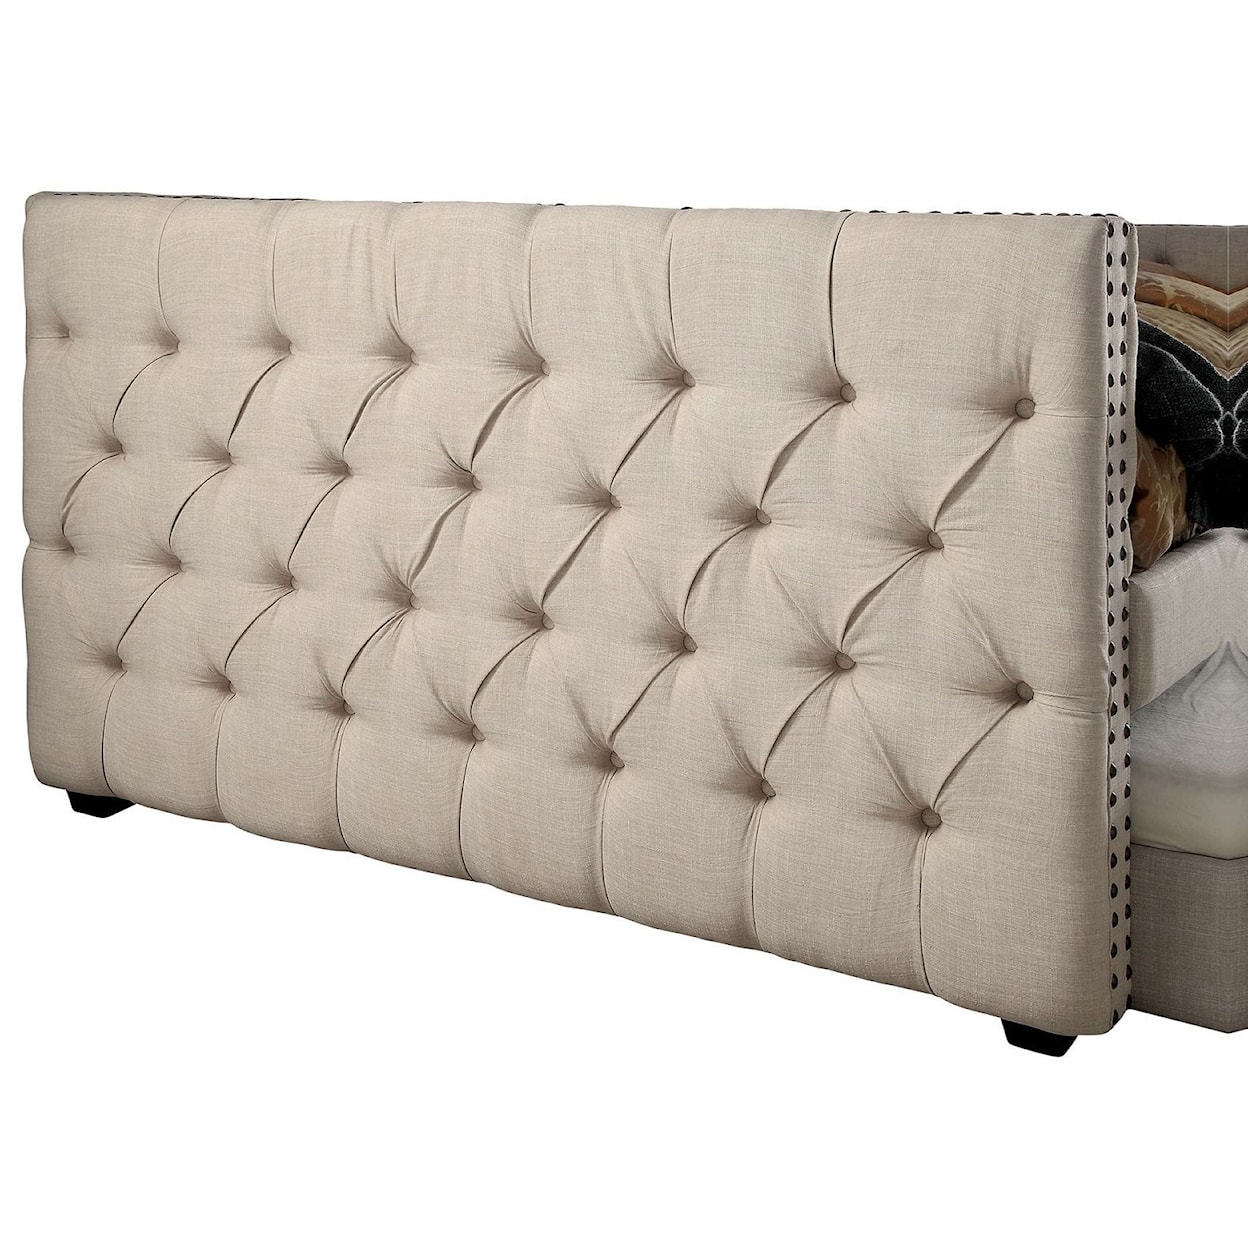 FUSA Suzanne Full Daybed with Trundle